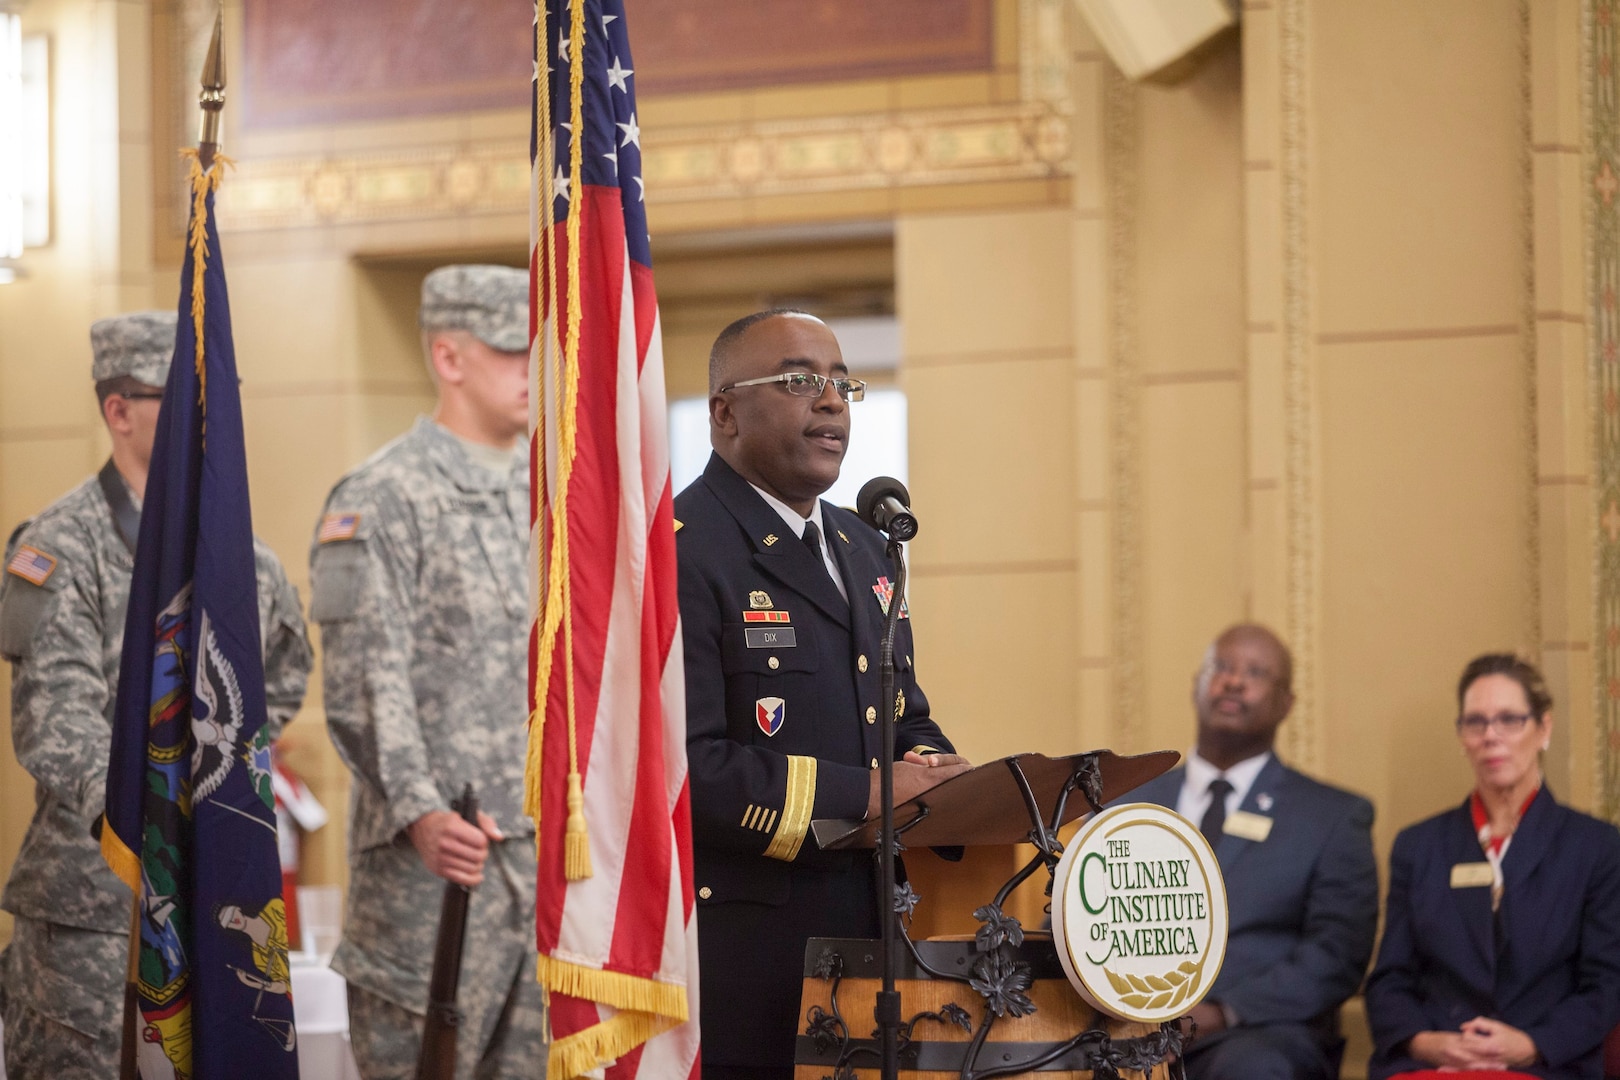 Army Brig. Gen. Richard B. Dix addresses a crowd of students, veterans and family members at the Culinary Institute of America’s Veterans Day program in Hyde Park, N.Y.